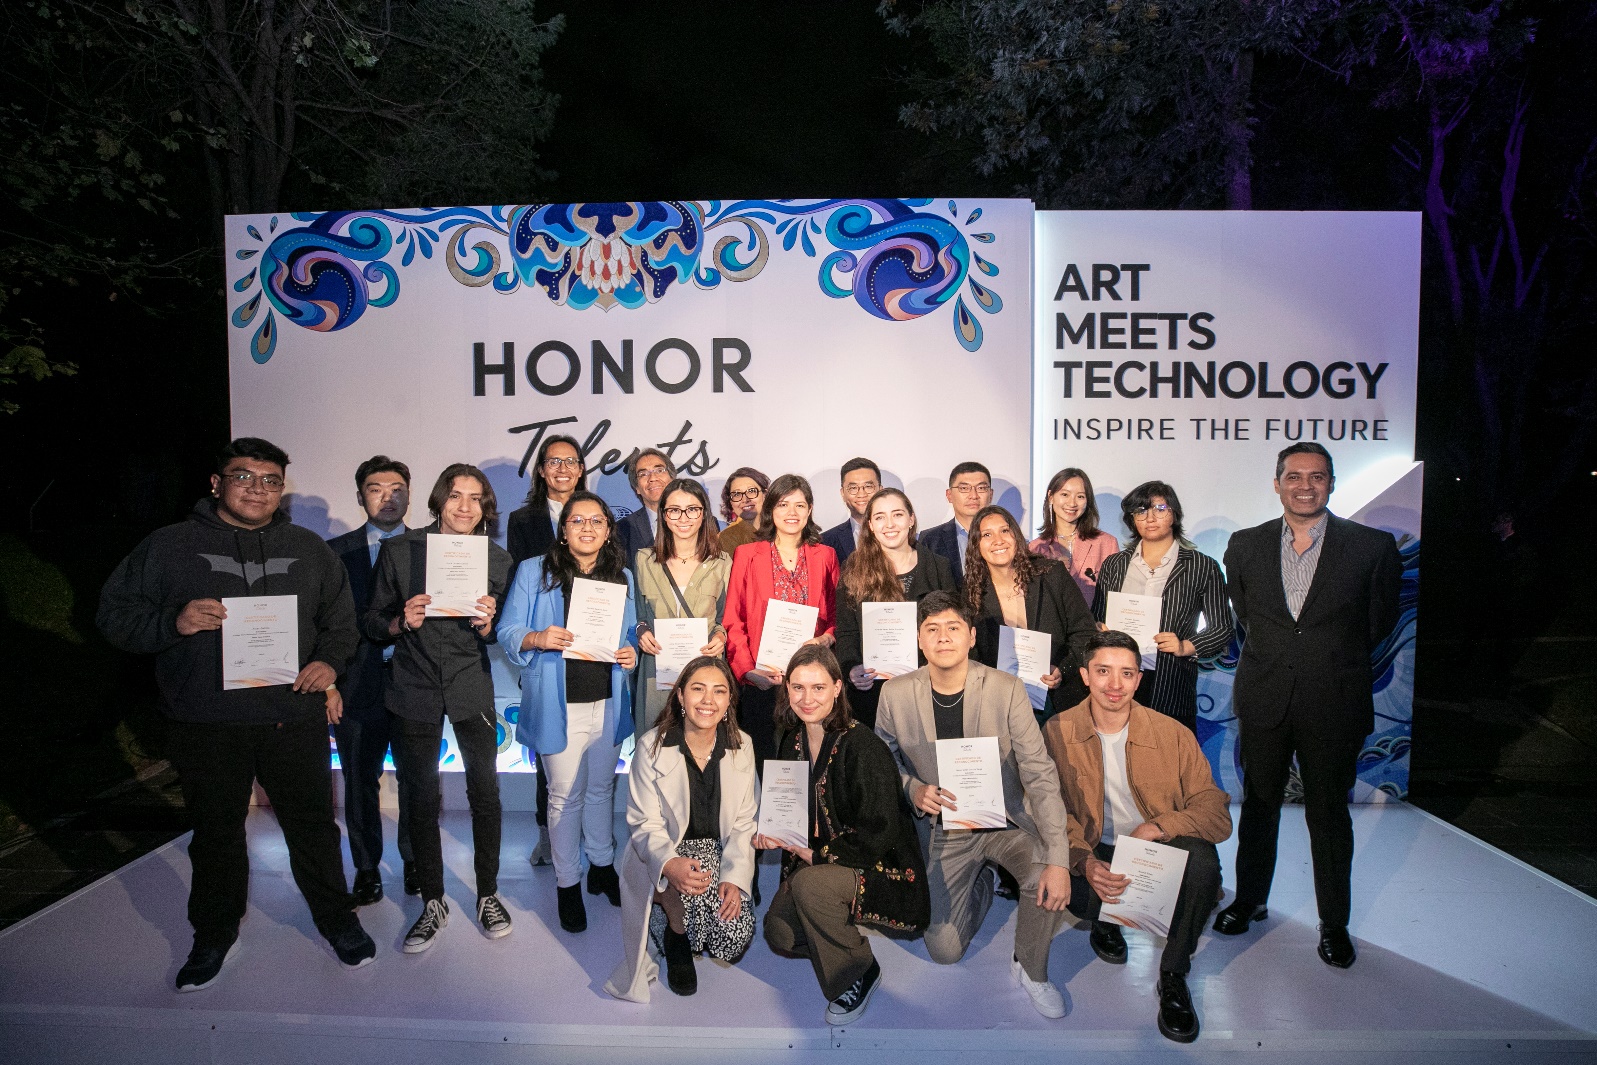 HONOR Talents annual exhibition held in the Modern Arts Museum, continues to inspire the future